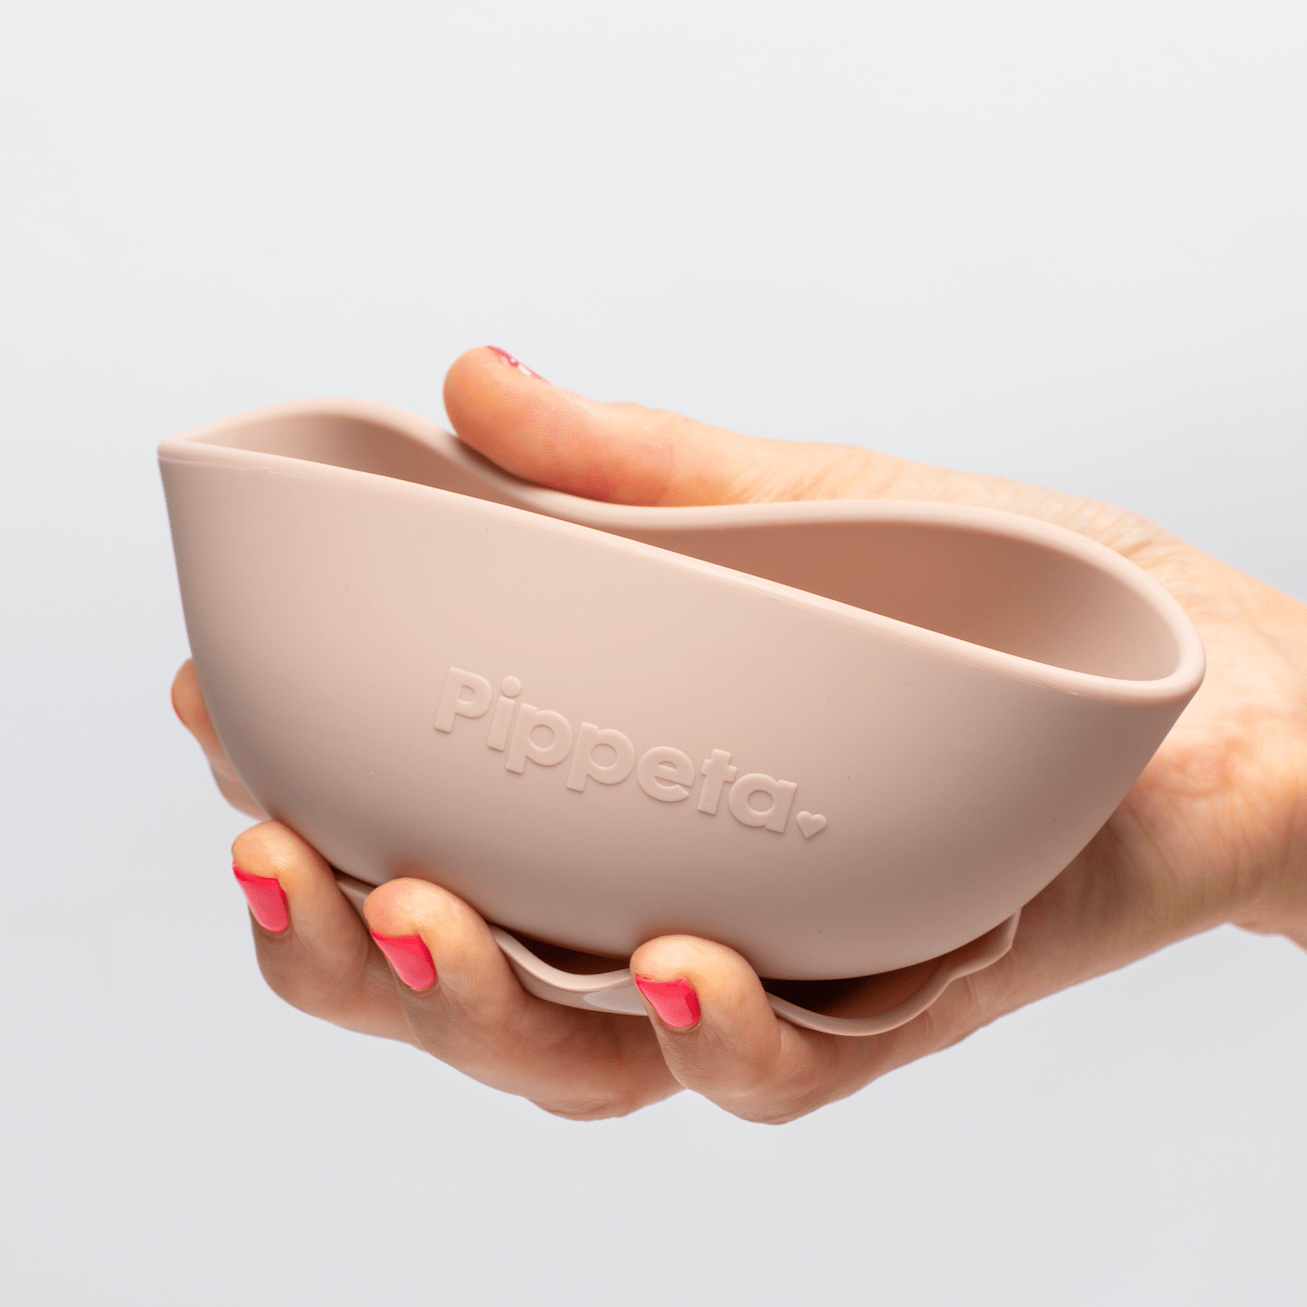 Pippeta Weaning Bowl Silicone Suction Bowl (Ash Rose)